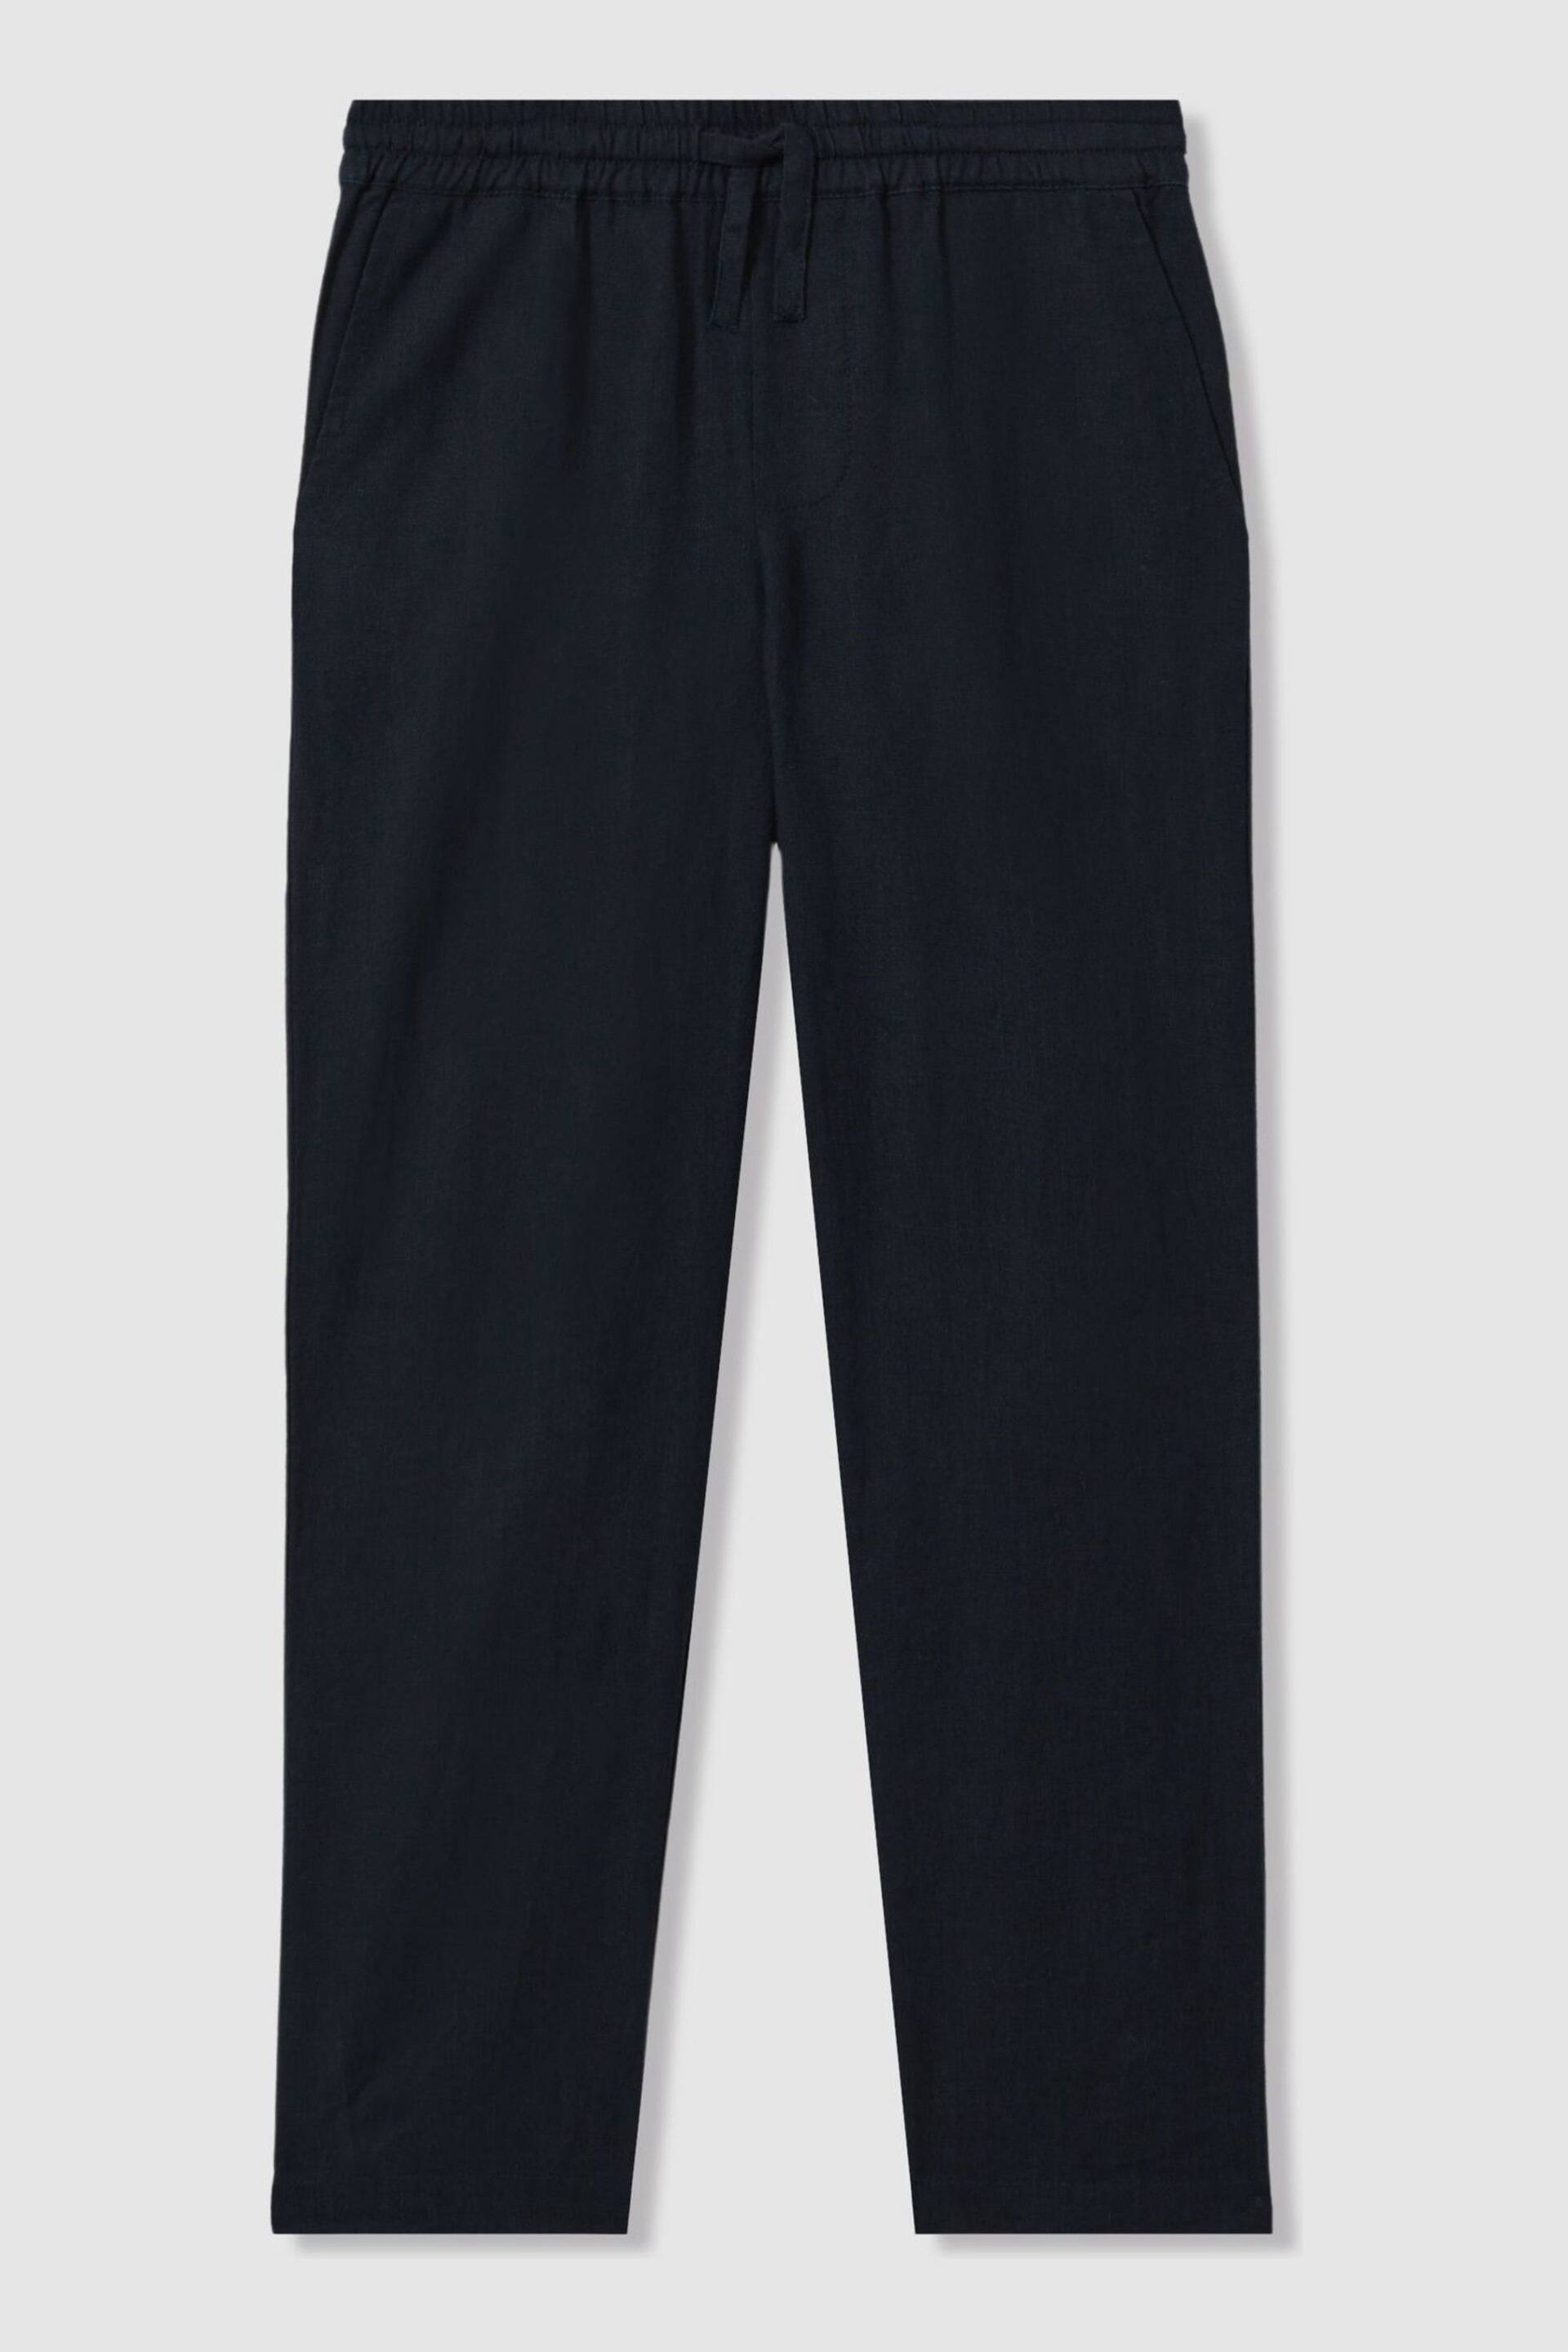 Reiss Navy Wilfred Senior Linen Drawstring Tapered Trousers - Image 2 of 4